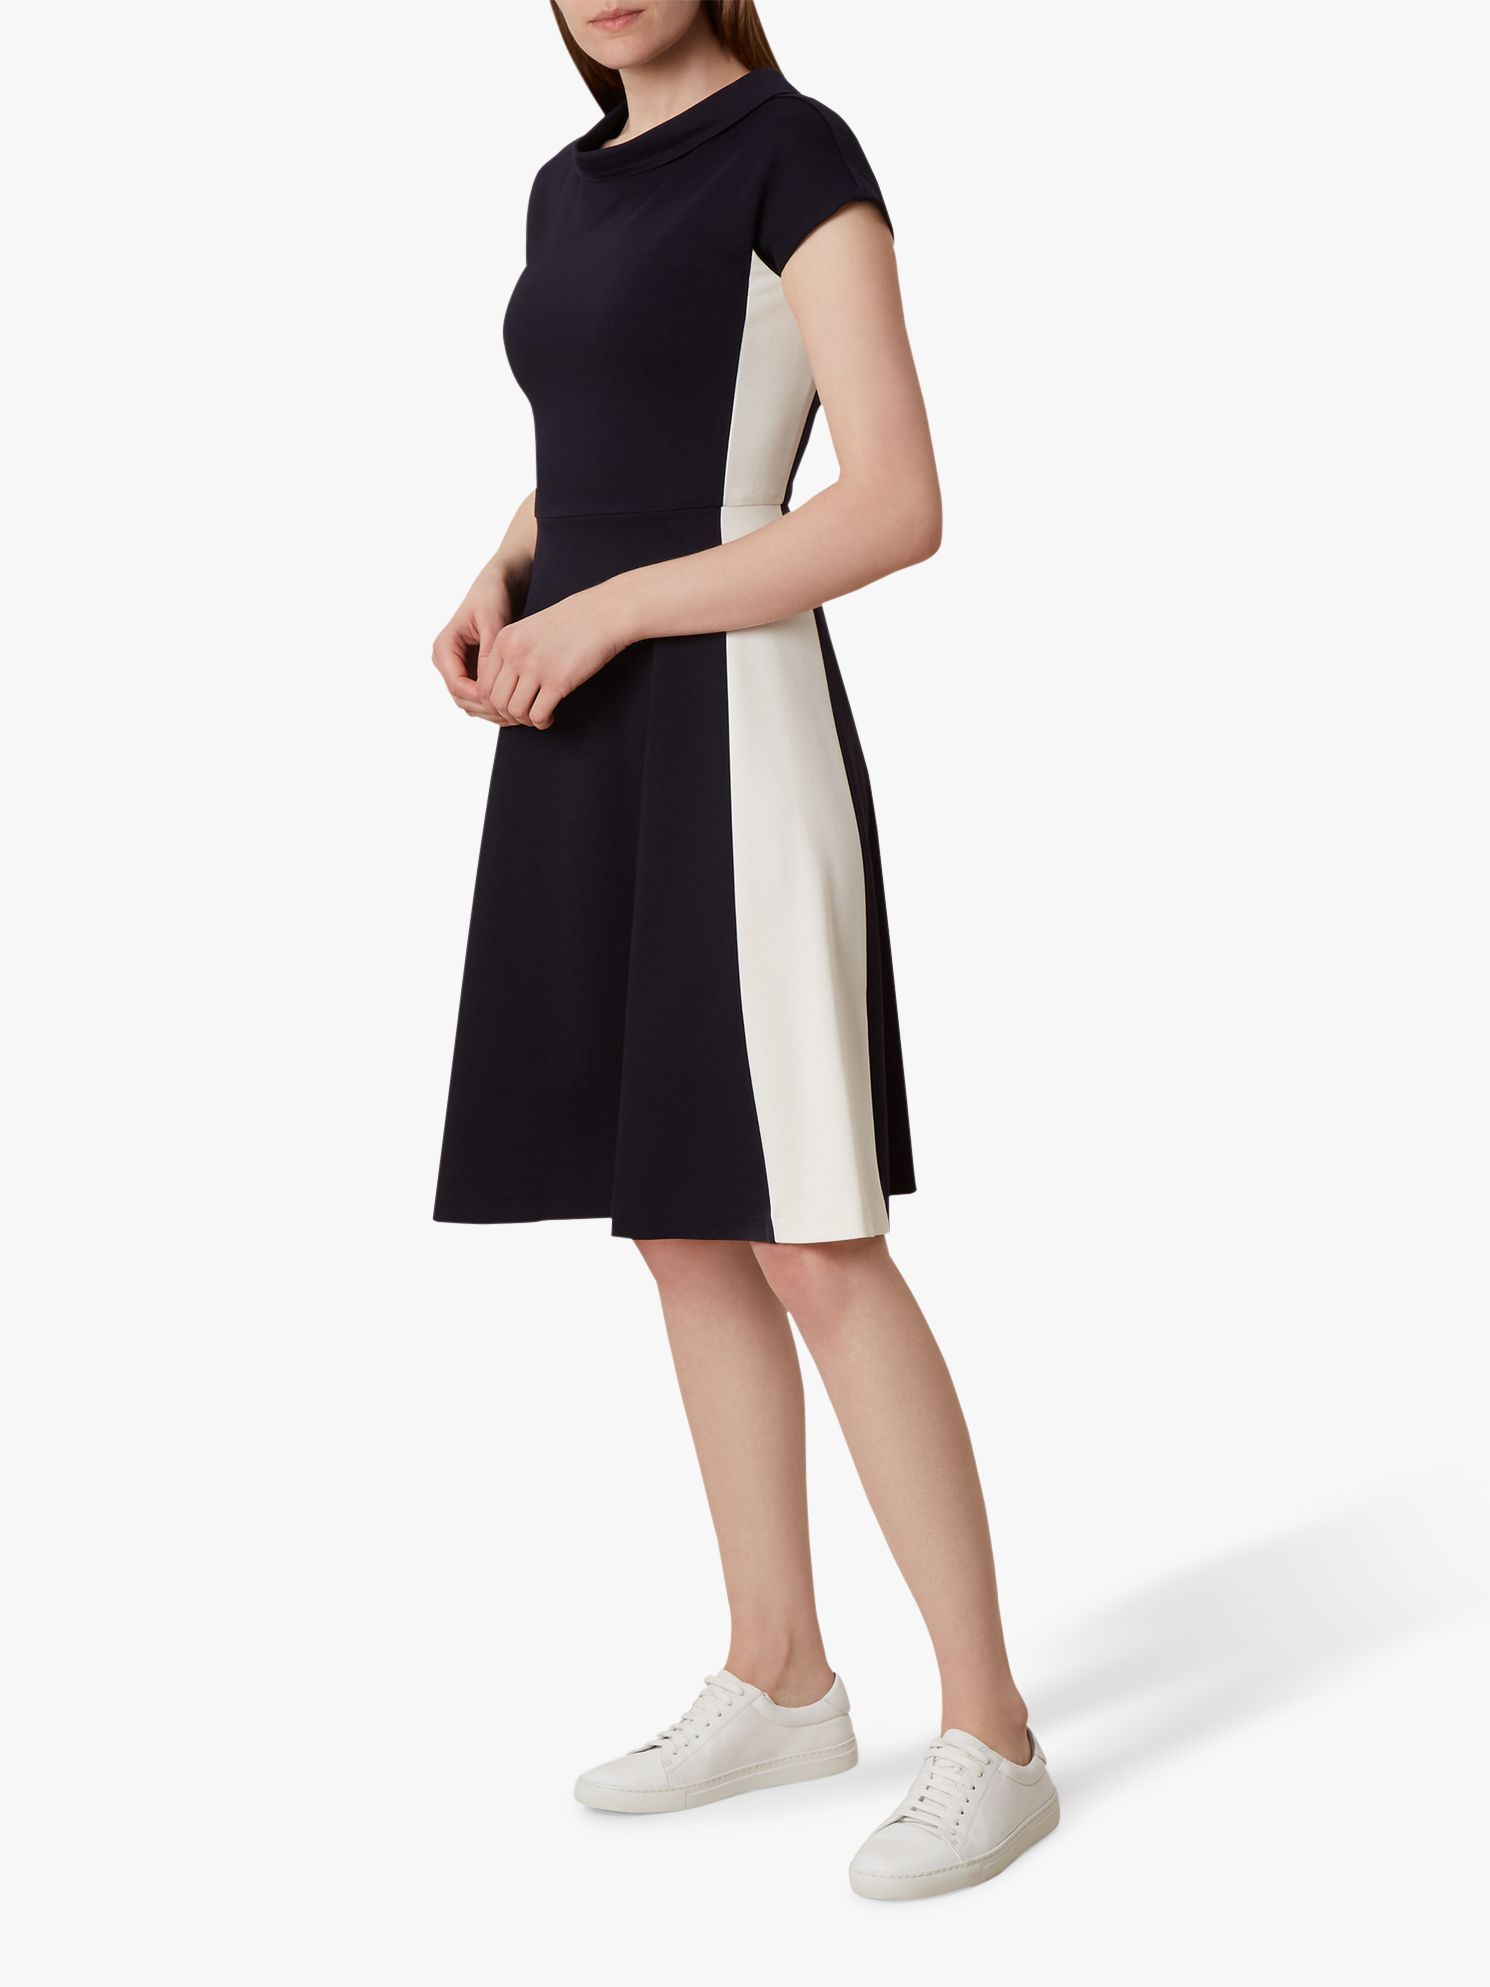 hobbs fit and flare dress